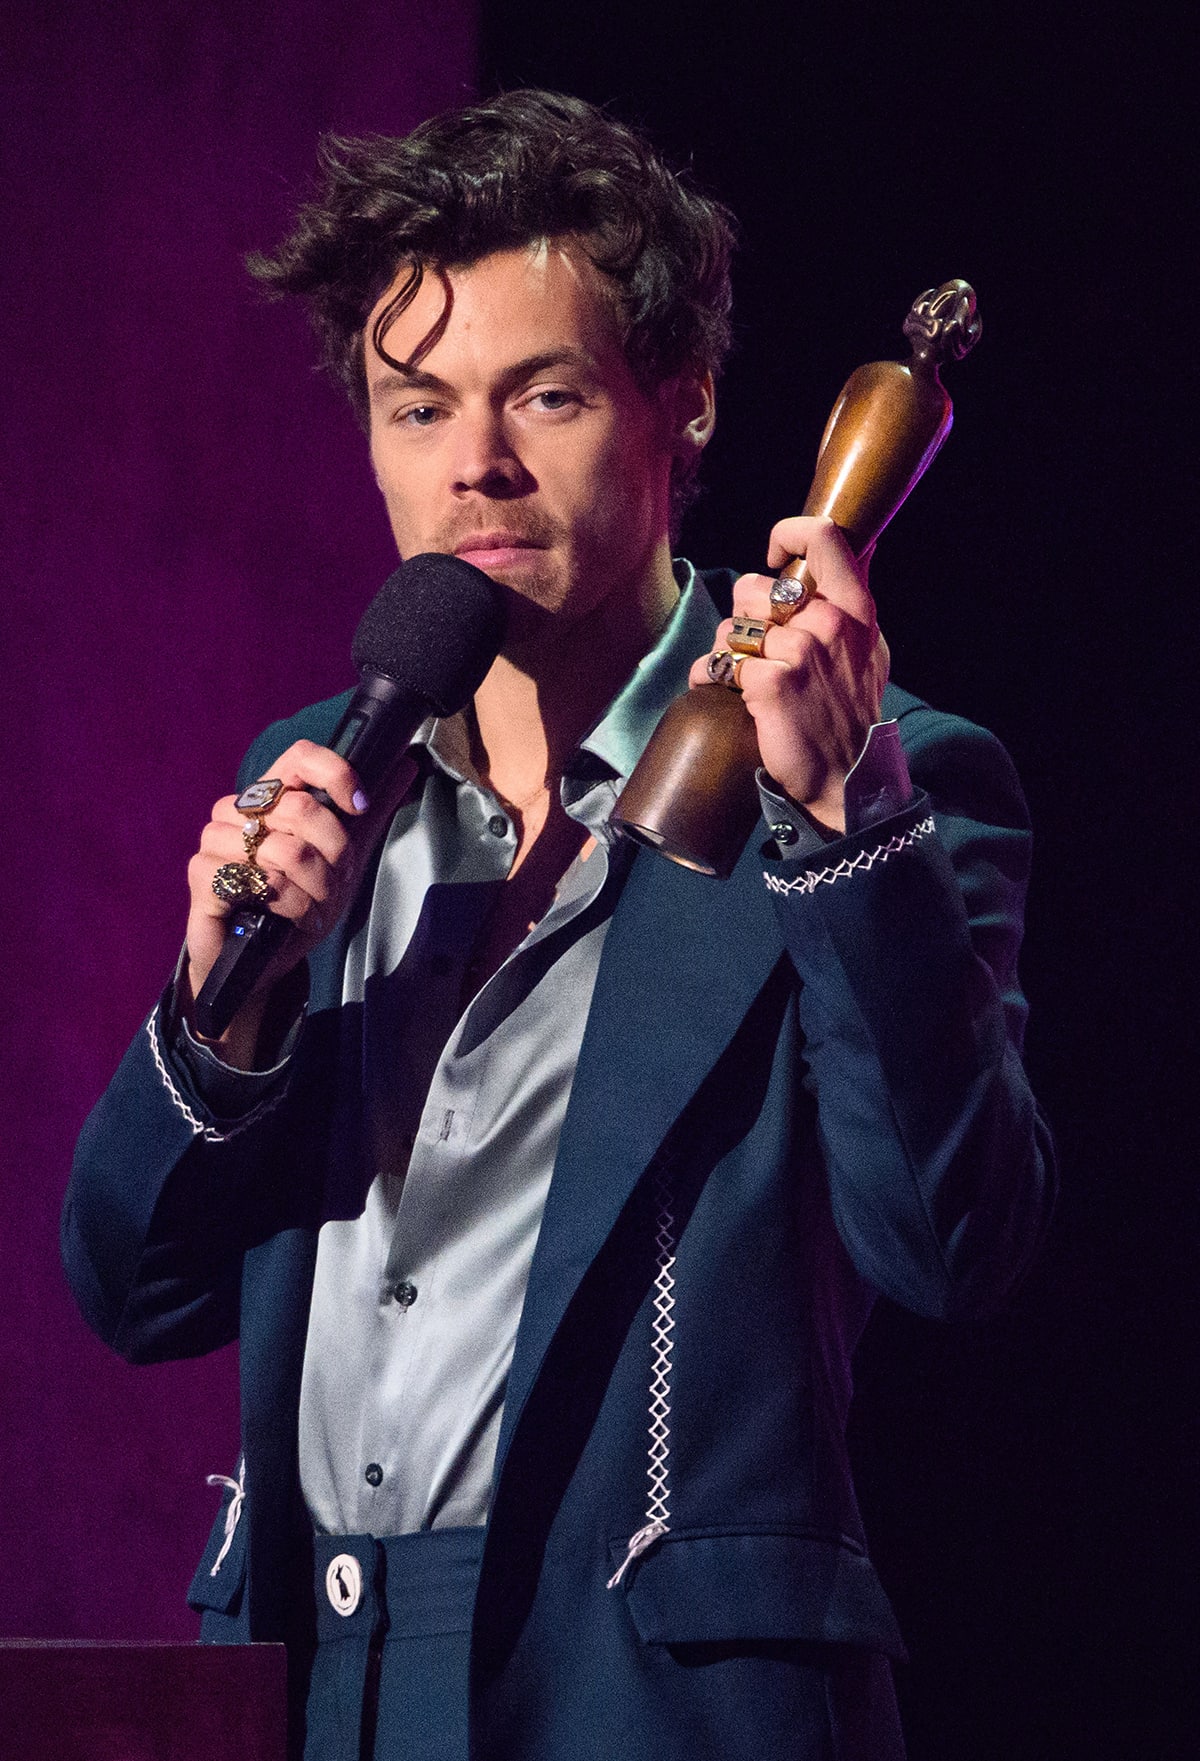 Harry Styles at the Brit Awards 2023 Show at the O2 Arena, London in February 2023